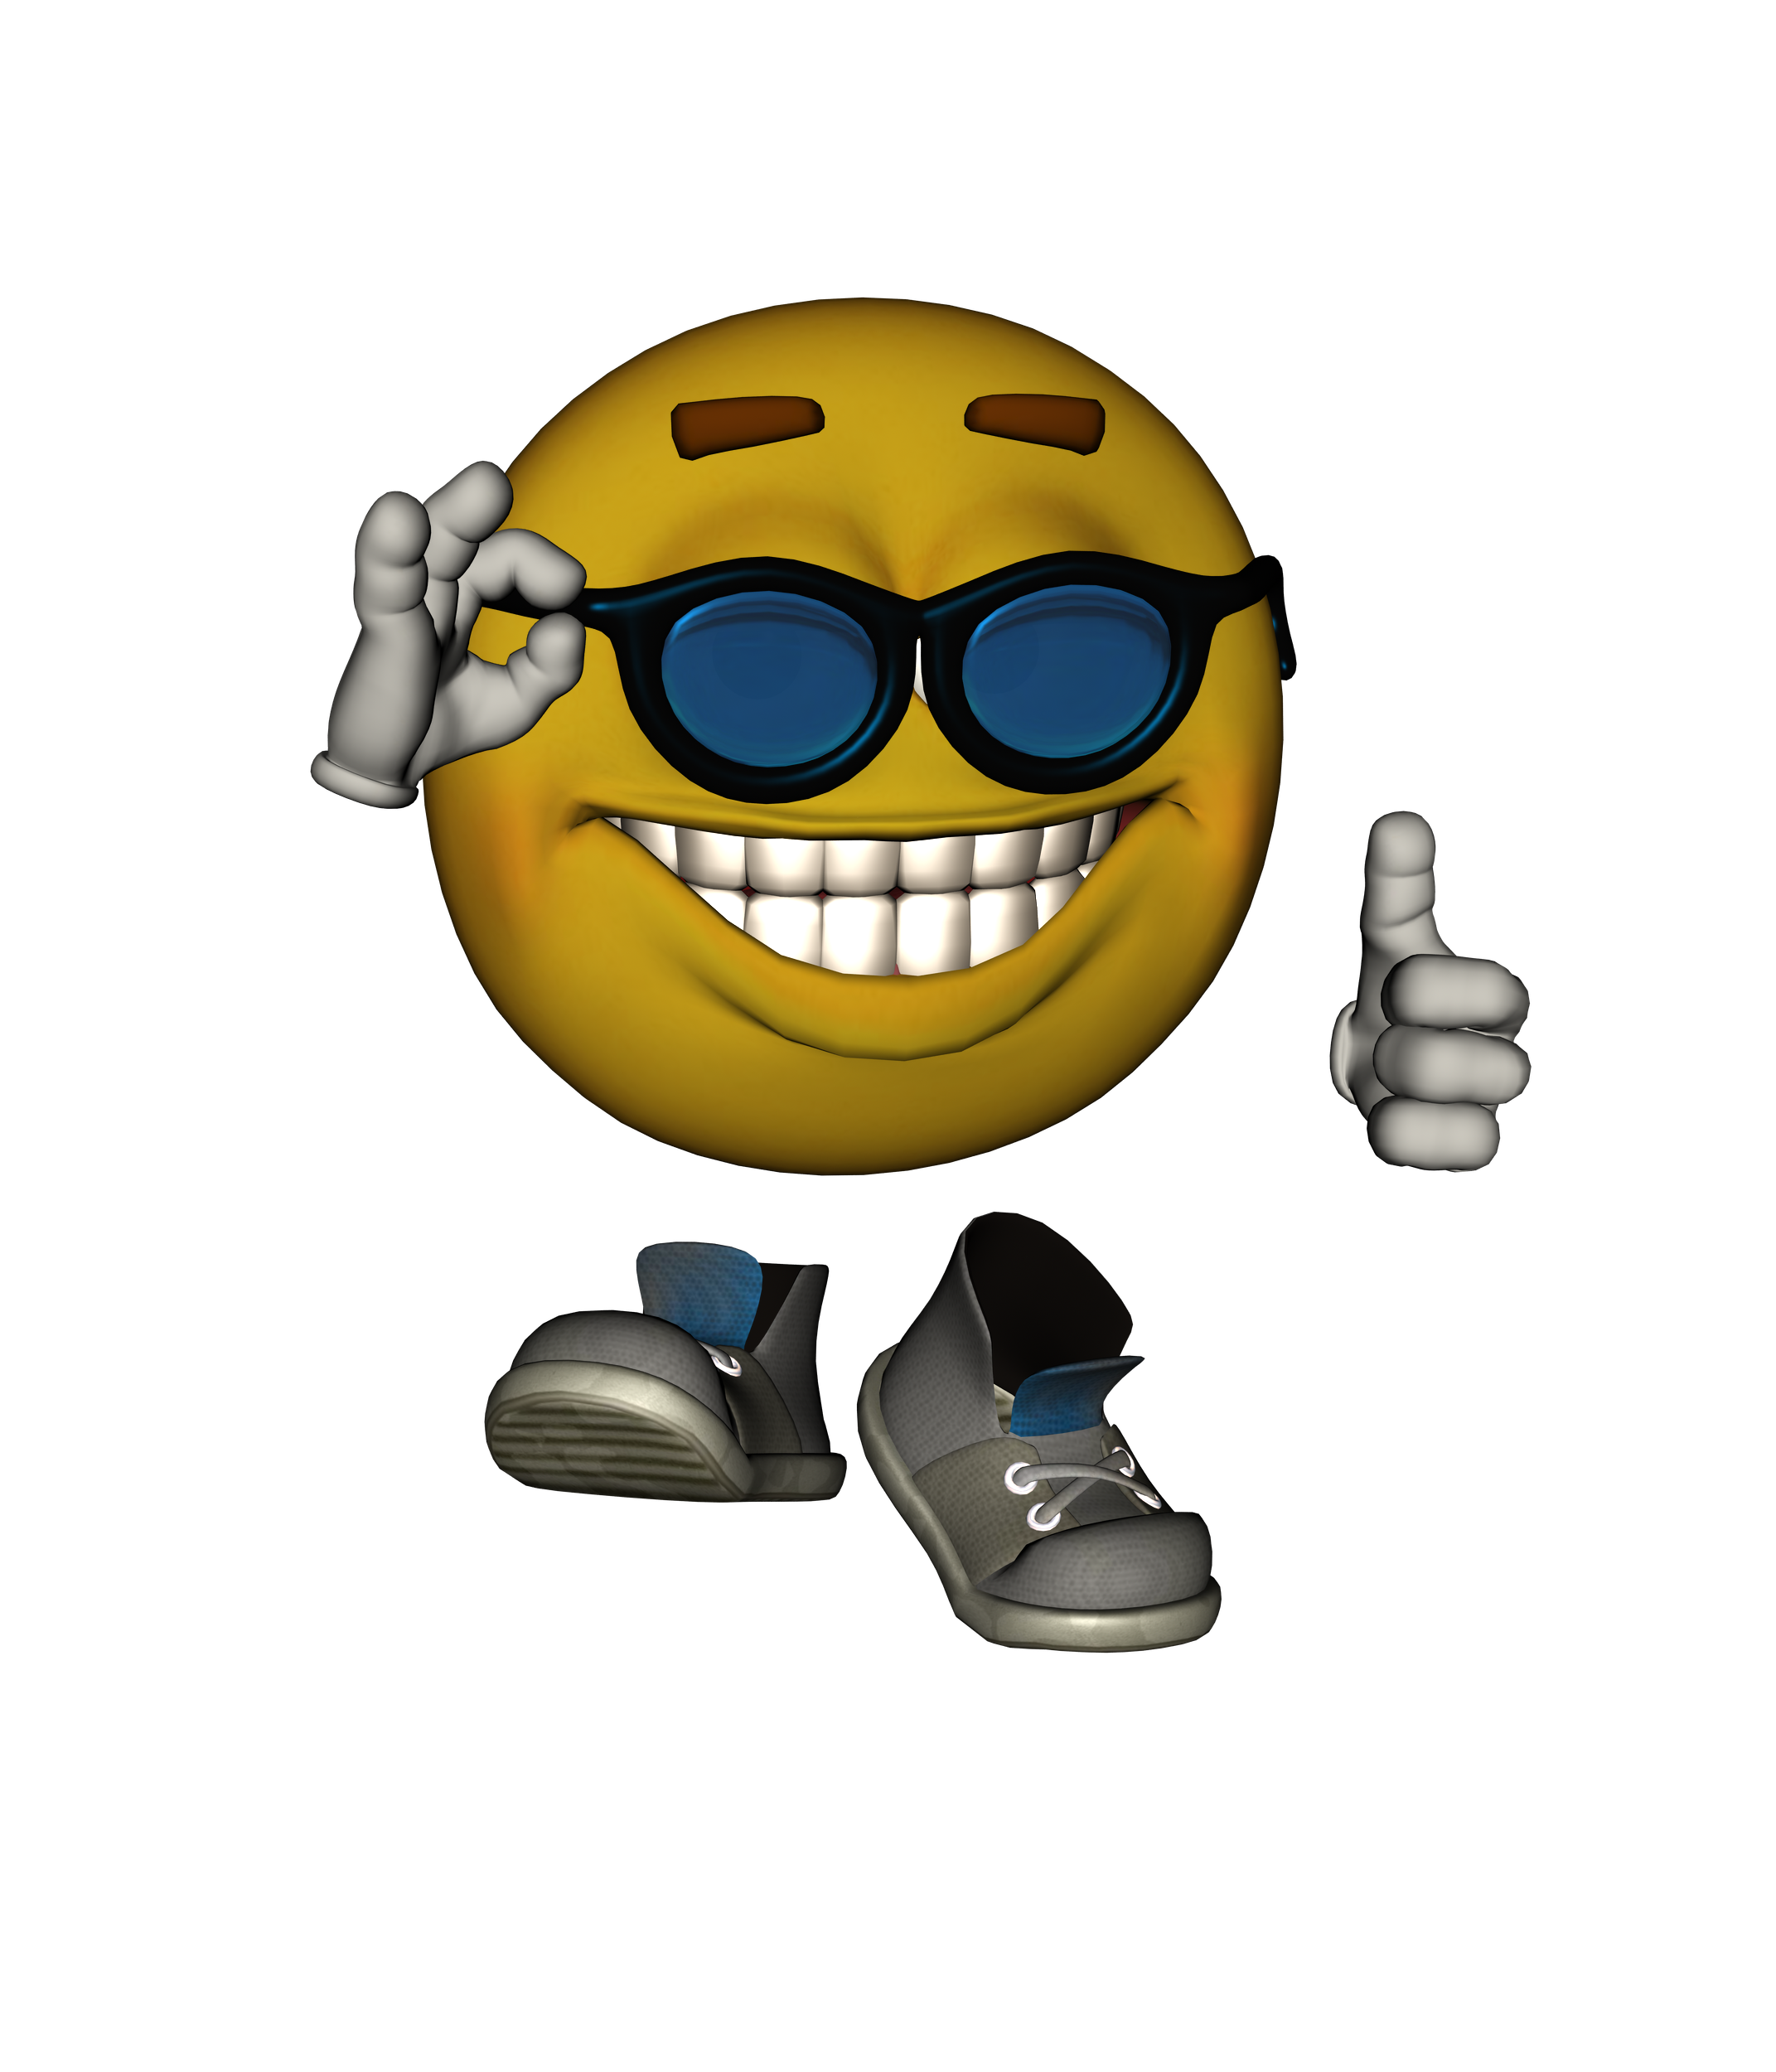 0 Result Images of Thumbs Up Emoji Meme Png - PNG Image Collection